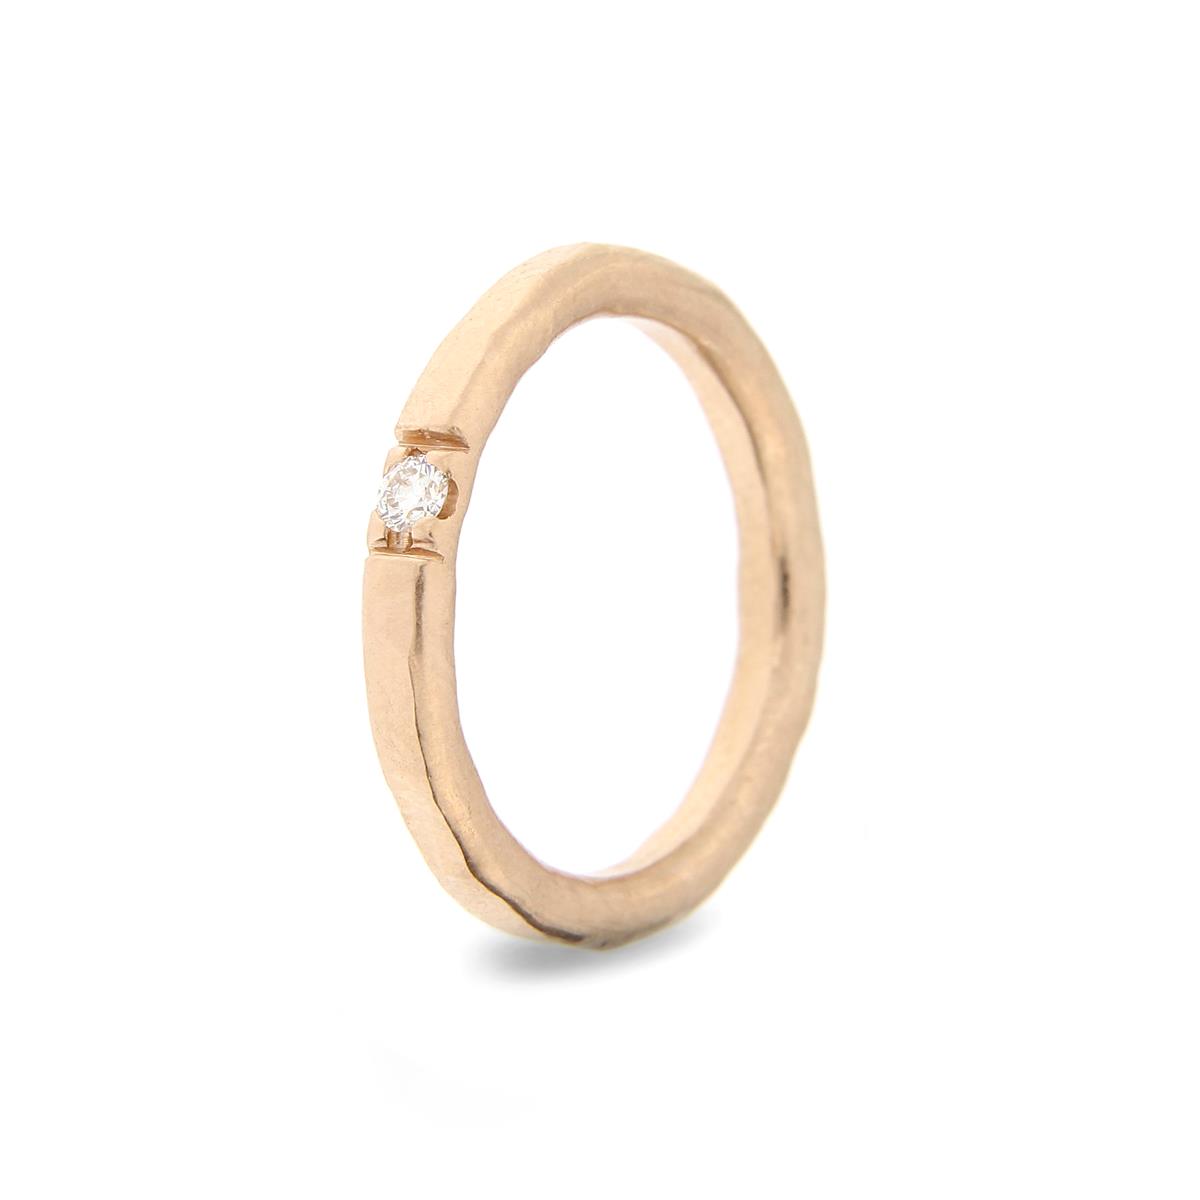 Katie g. Jewellery_Hammered Ring 2,5mm - Rosé Gold 3 + 1 Diamond